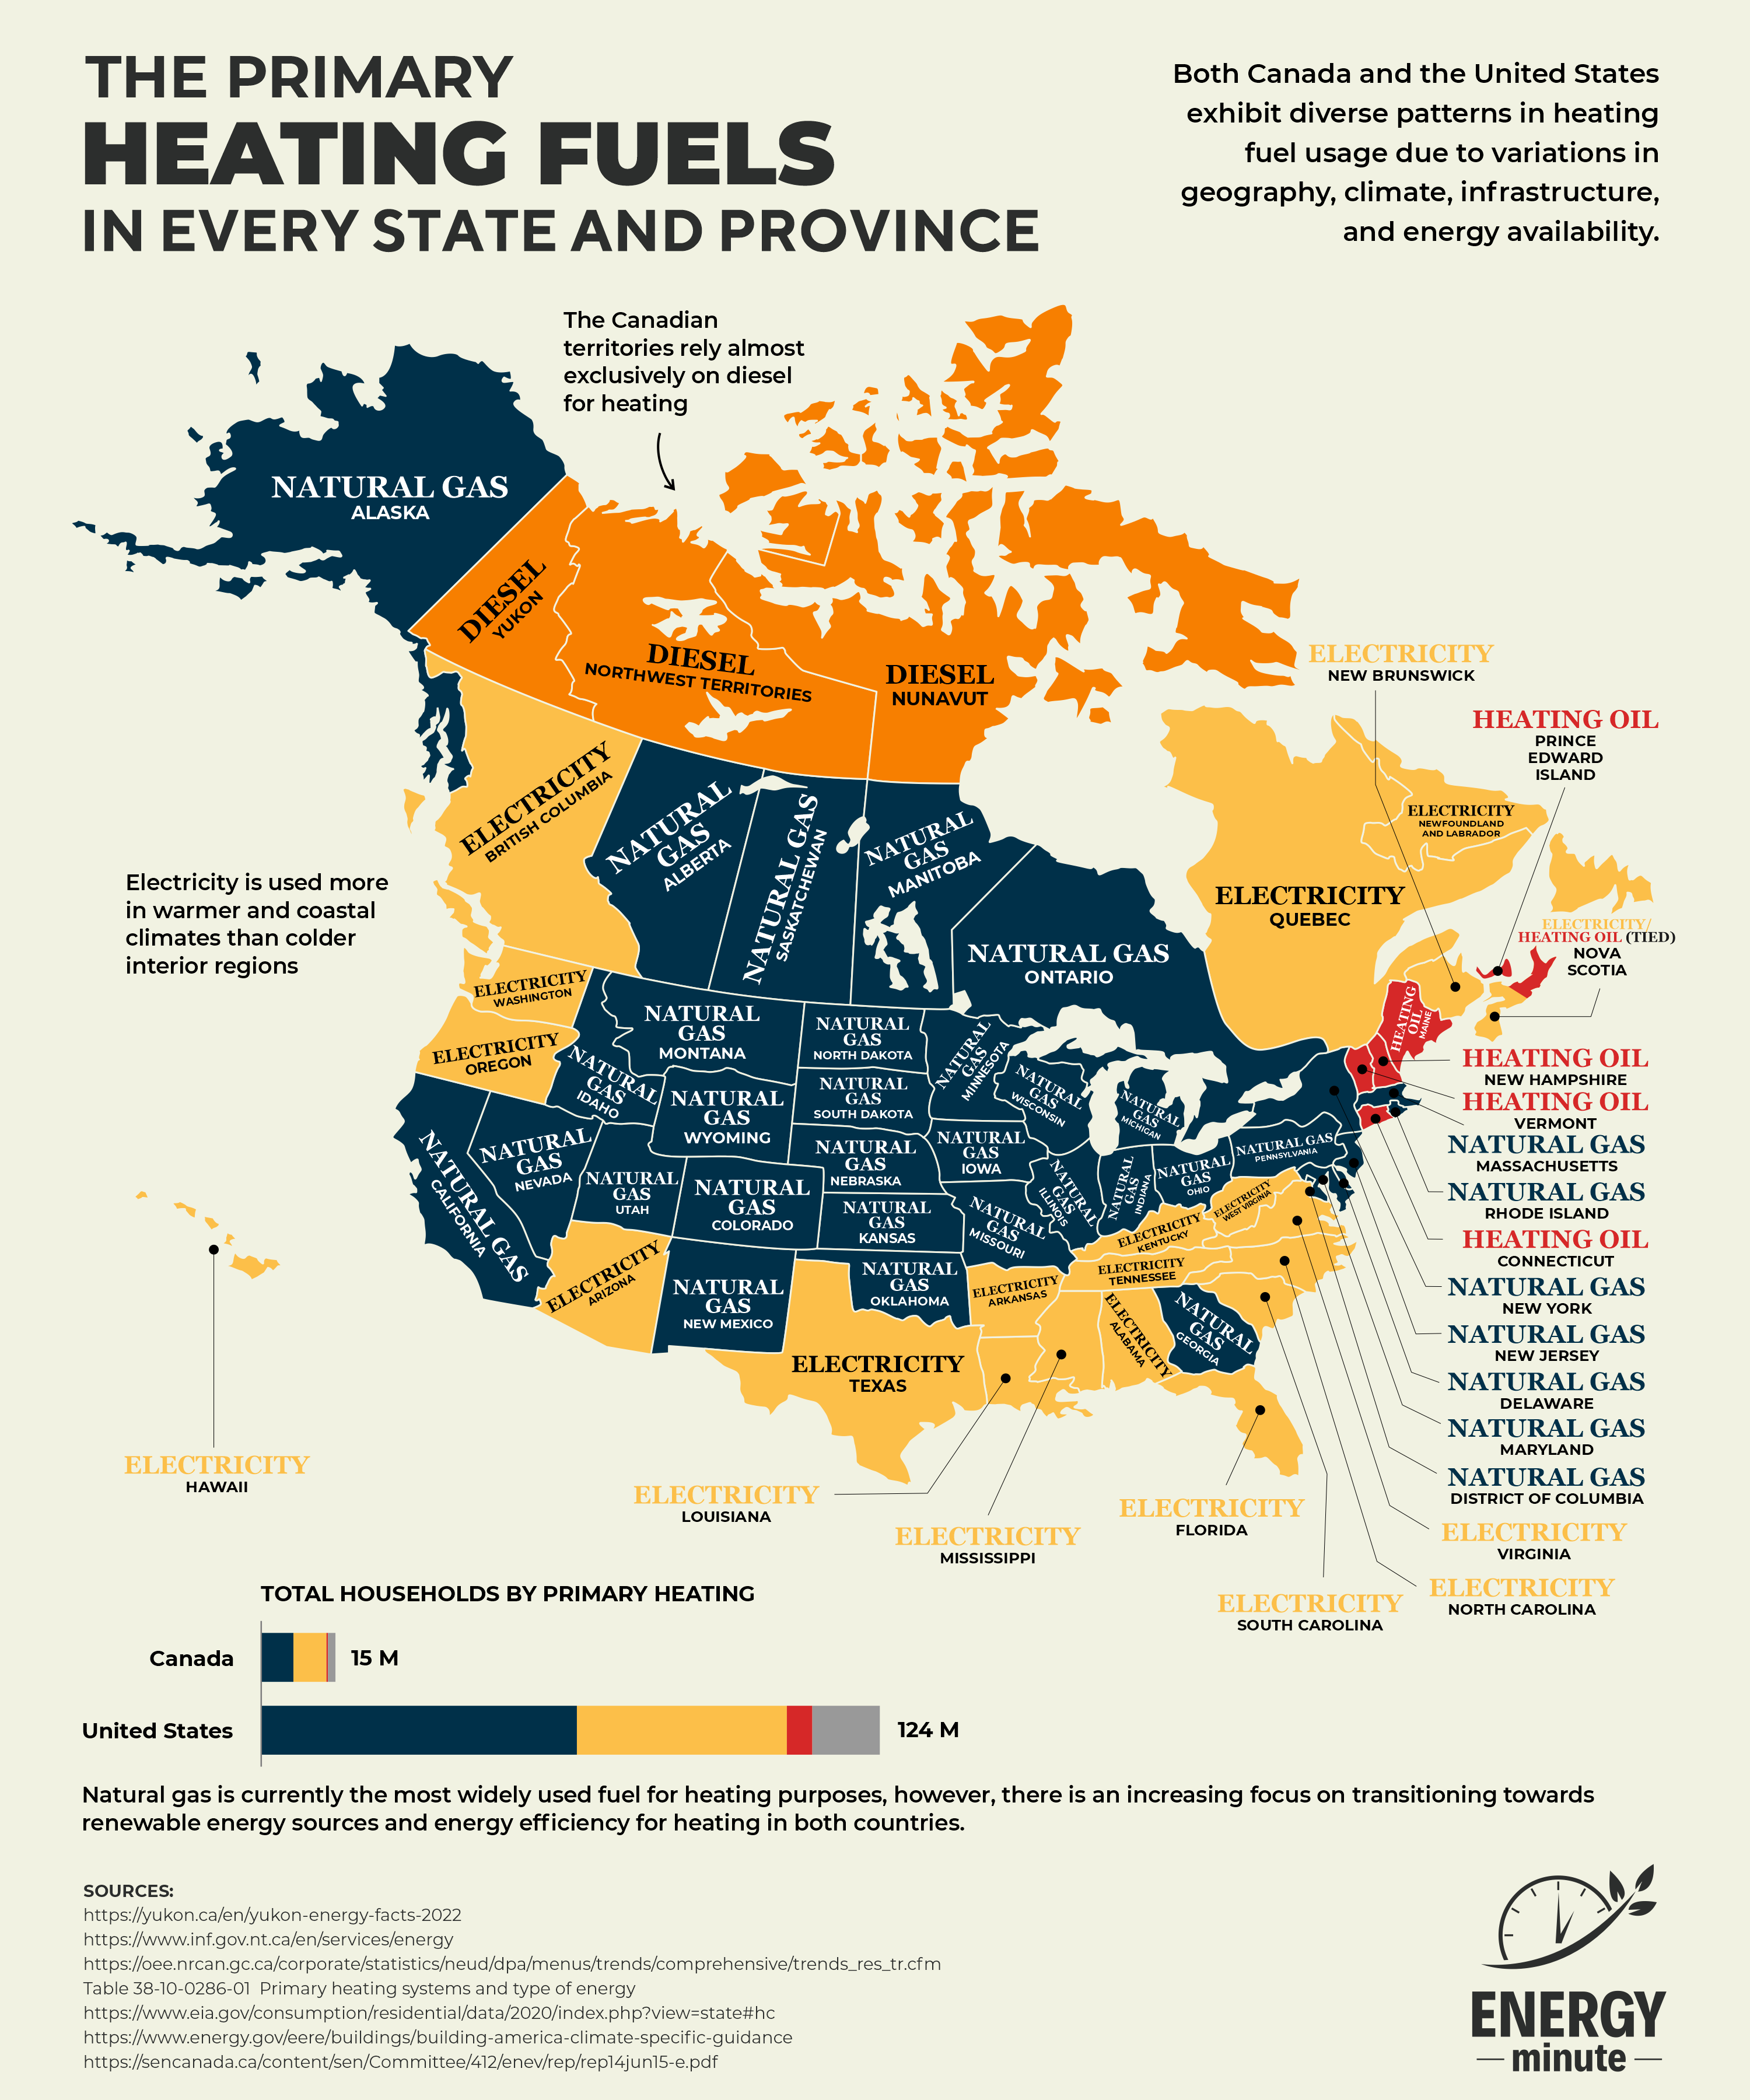 Major Heating Fuels Across Canada and the US